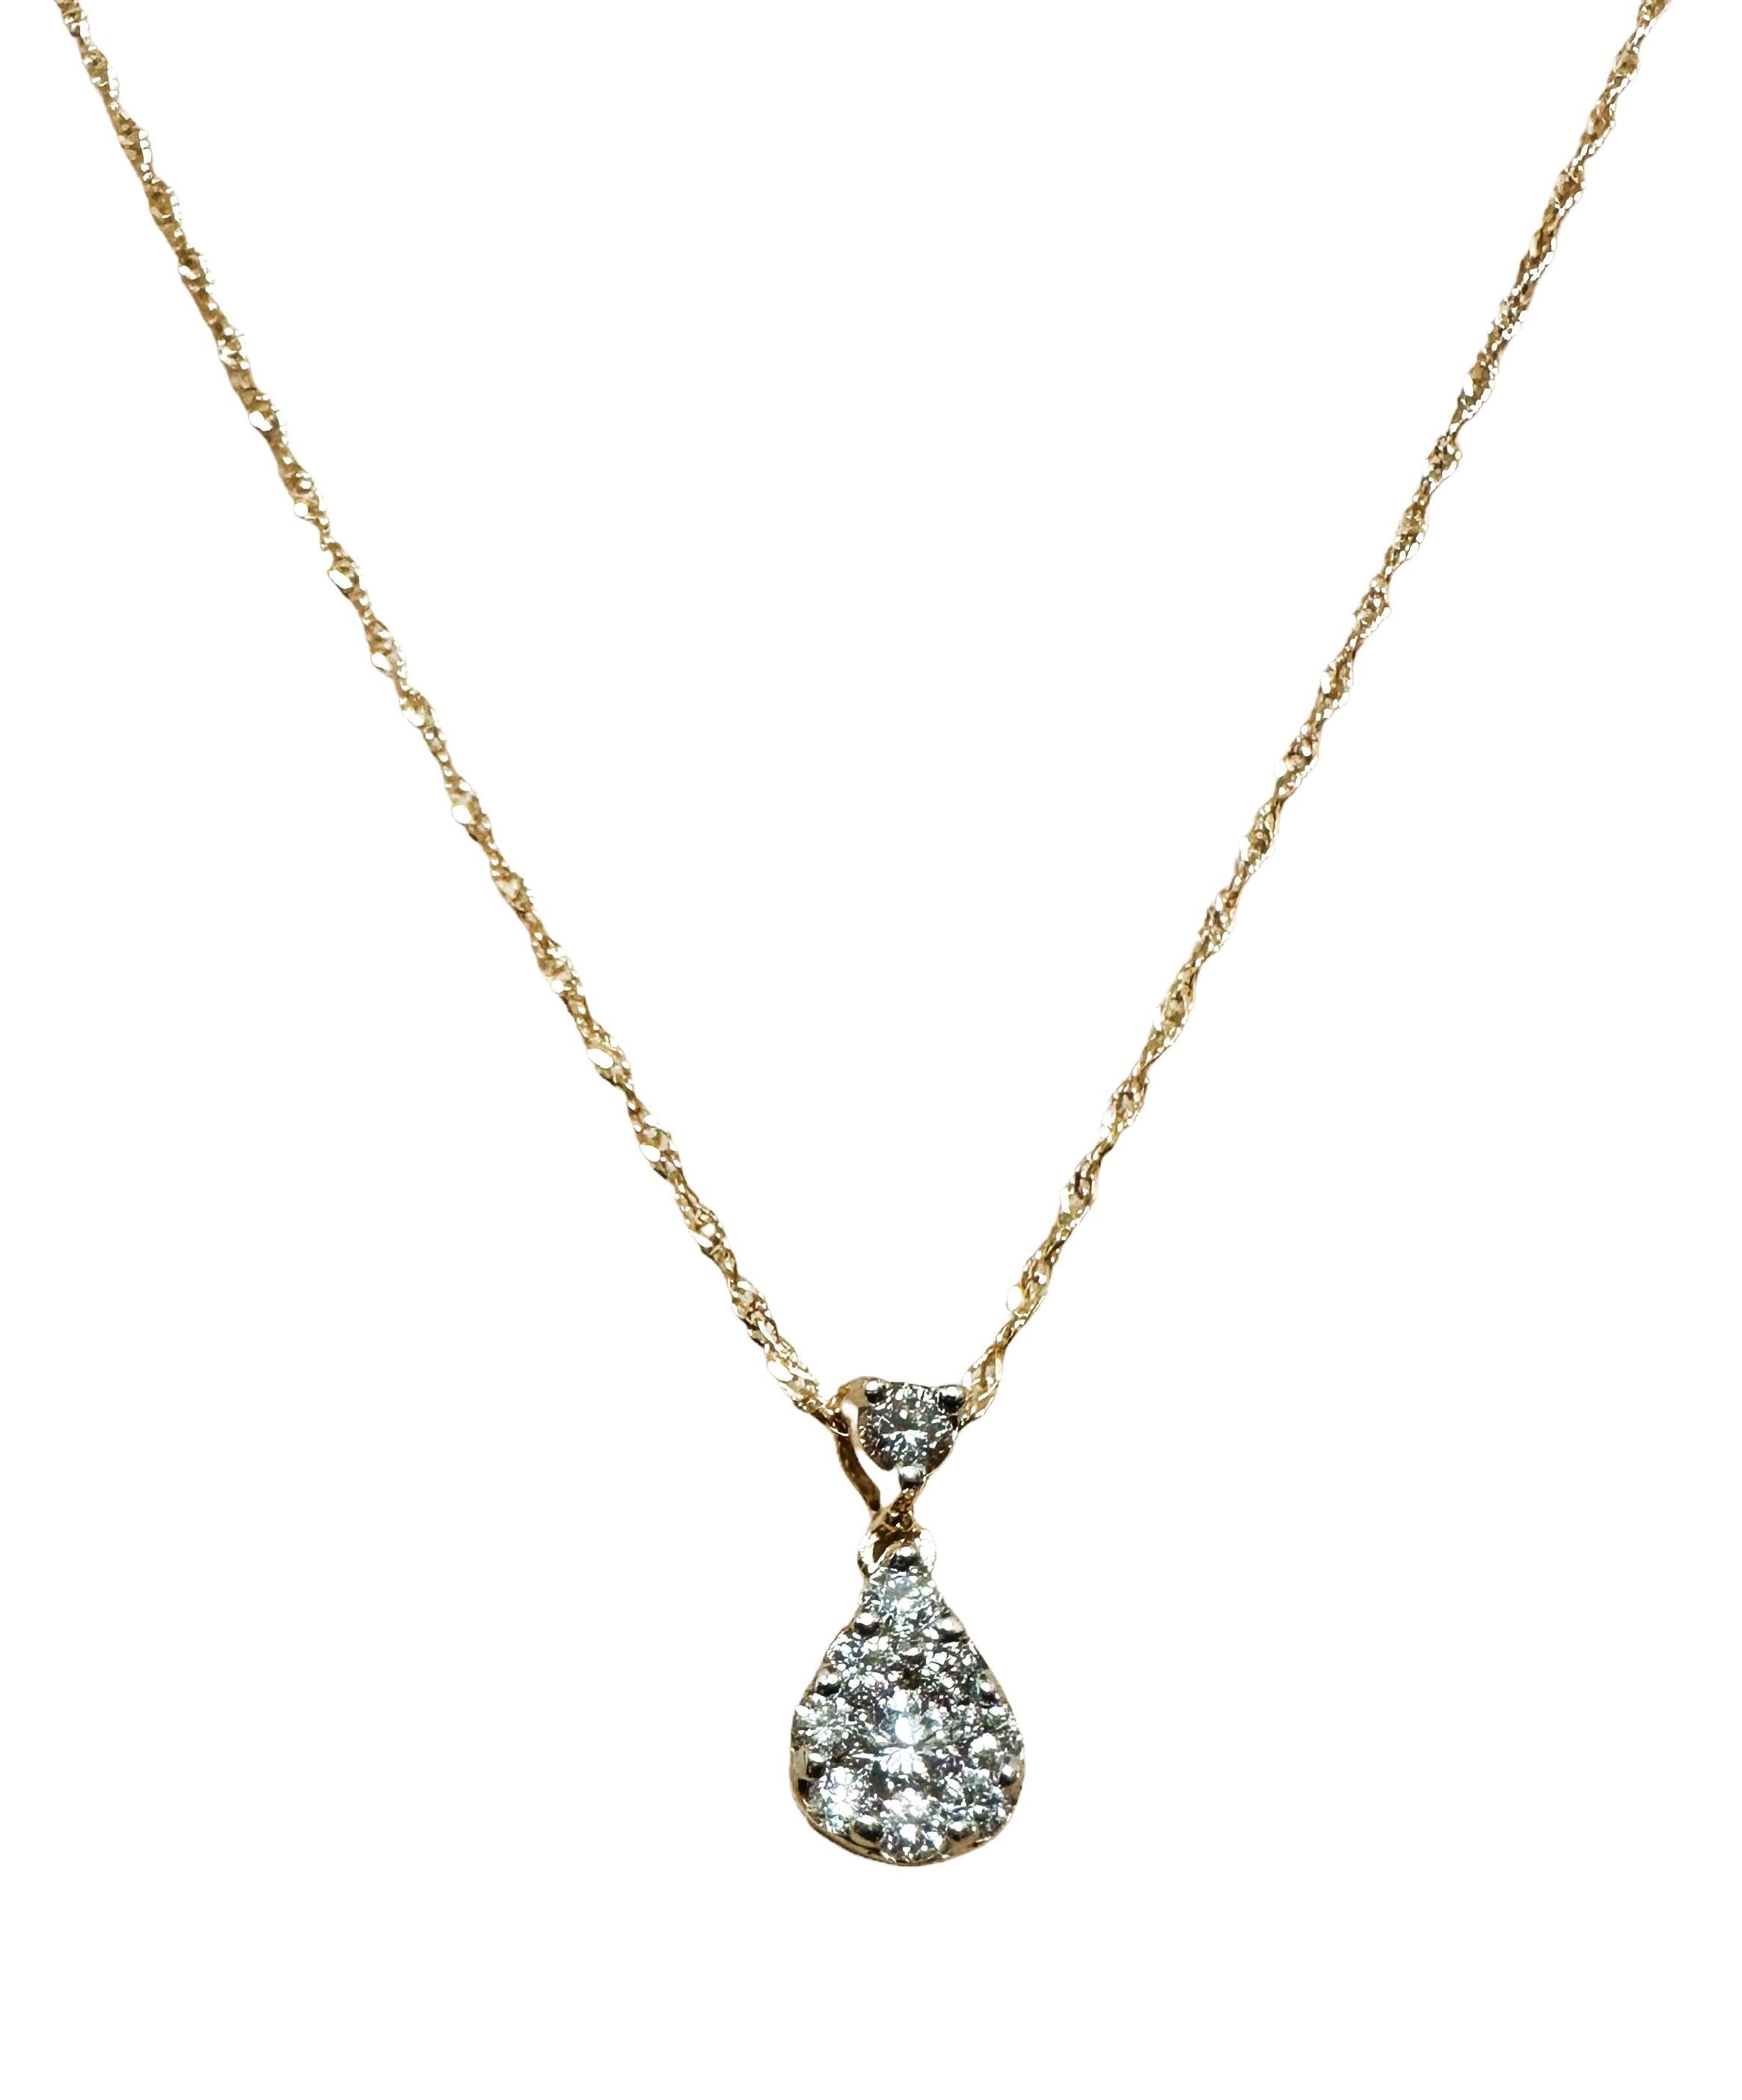 Brilliant Cut 14k Yellow Gold .60 ct Diamond Cluster Pendant and 14k Gold Chain 18